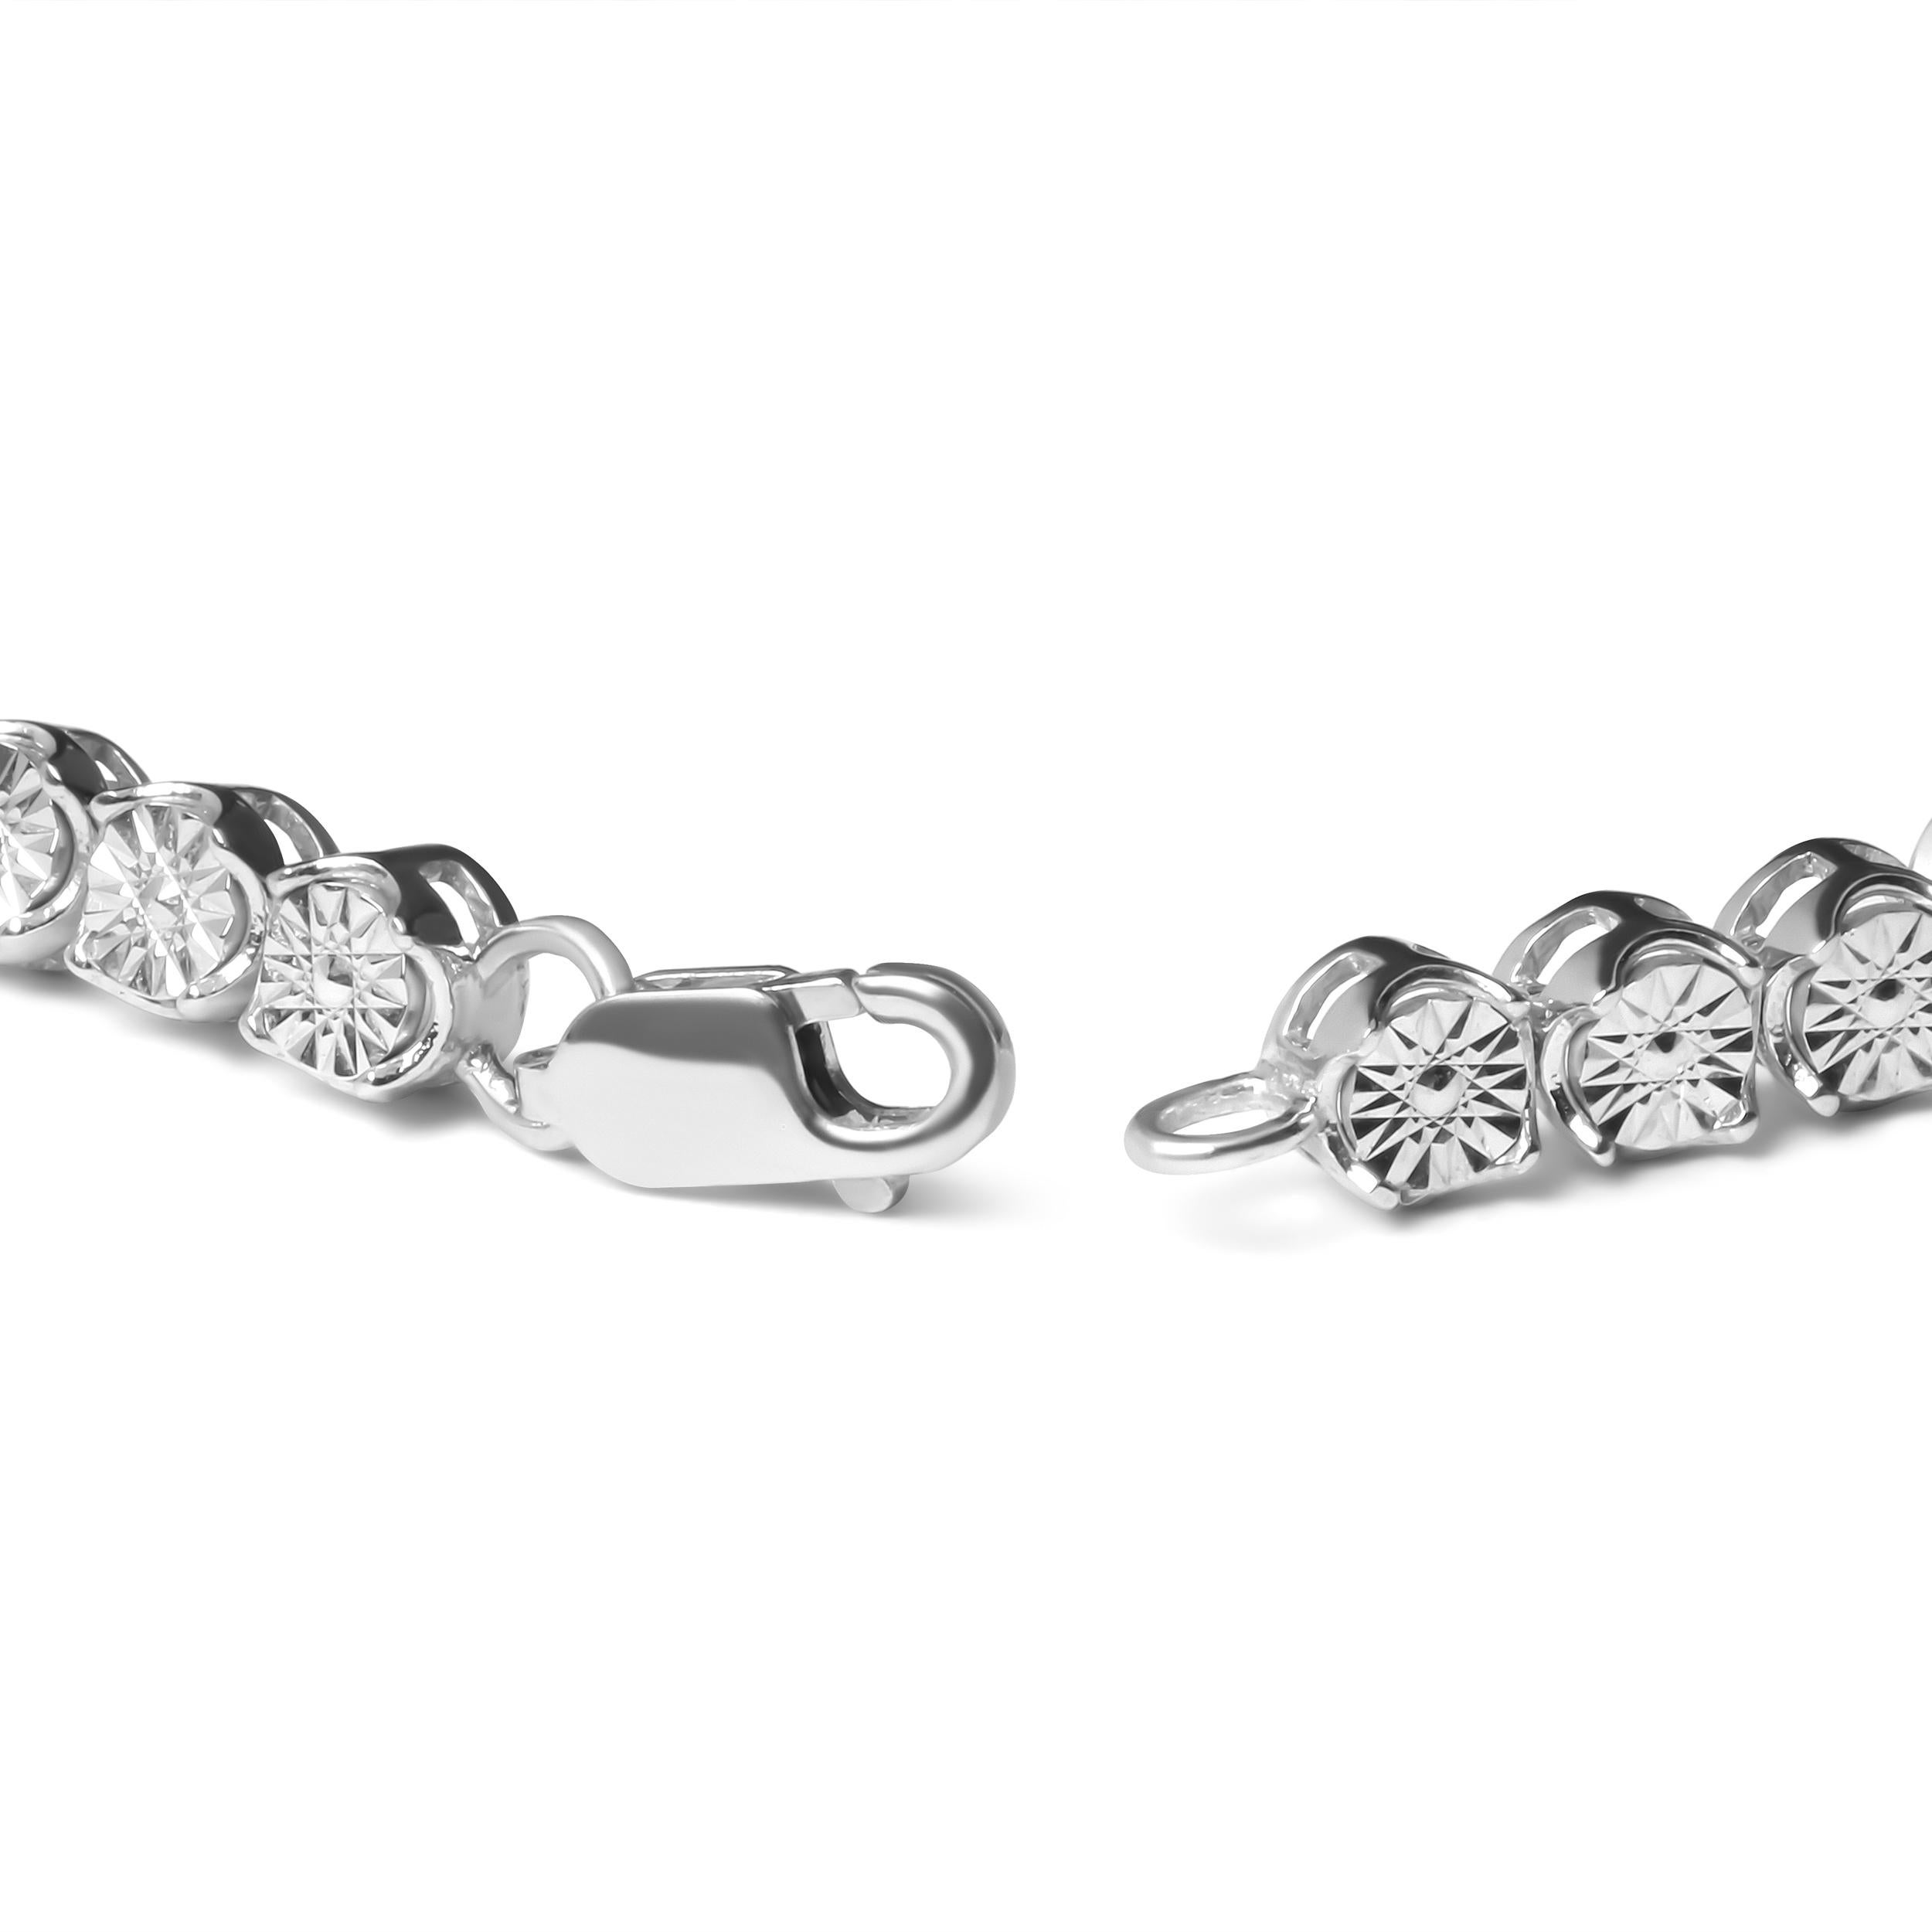 A different take on the typical diamond bracelet, this eye-catching design is highlighted by the 51 natural round diamonds in miracle setting that form beautiful floral clusters. Housed in a .925 Sterling Silver chain, the striking piece radiates